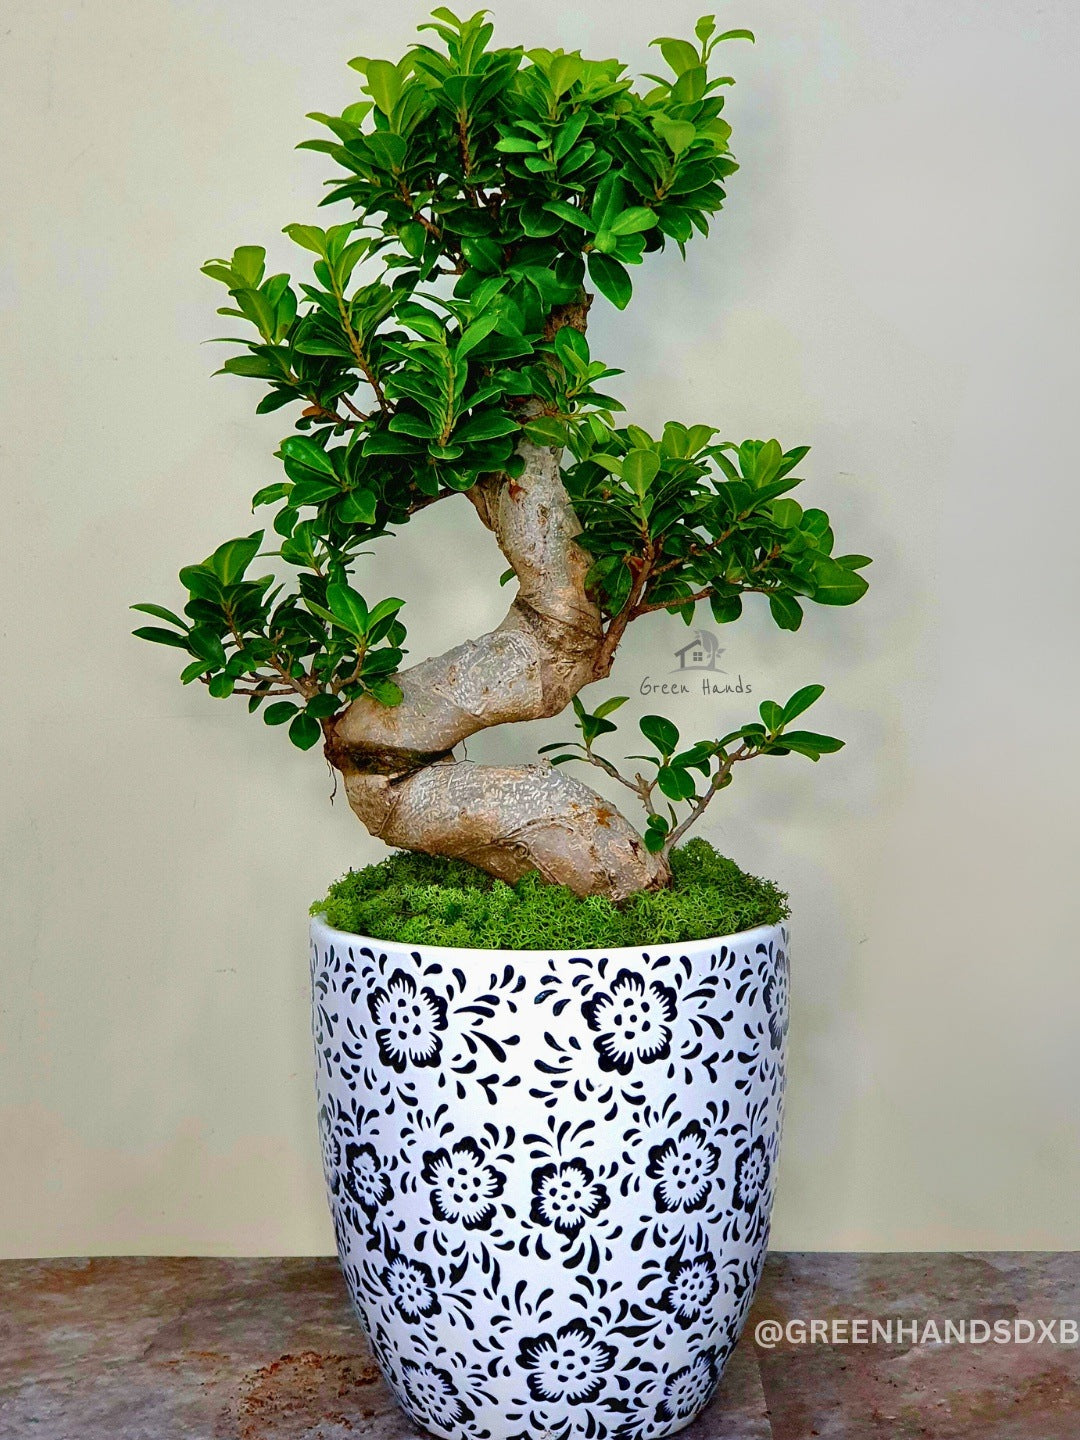 Potted S Bonsai Tree Planted in Rainbow Symphony Pot with Moss Topping